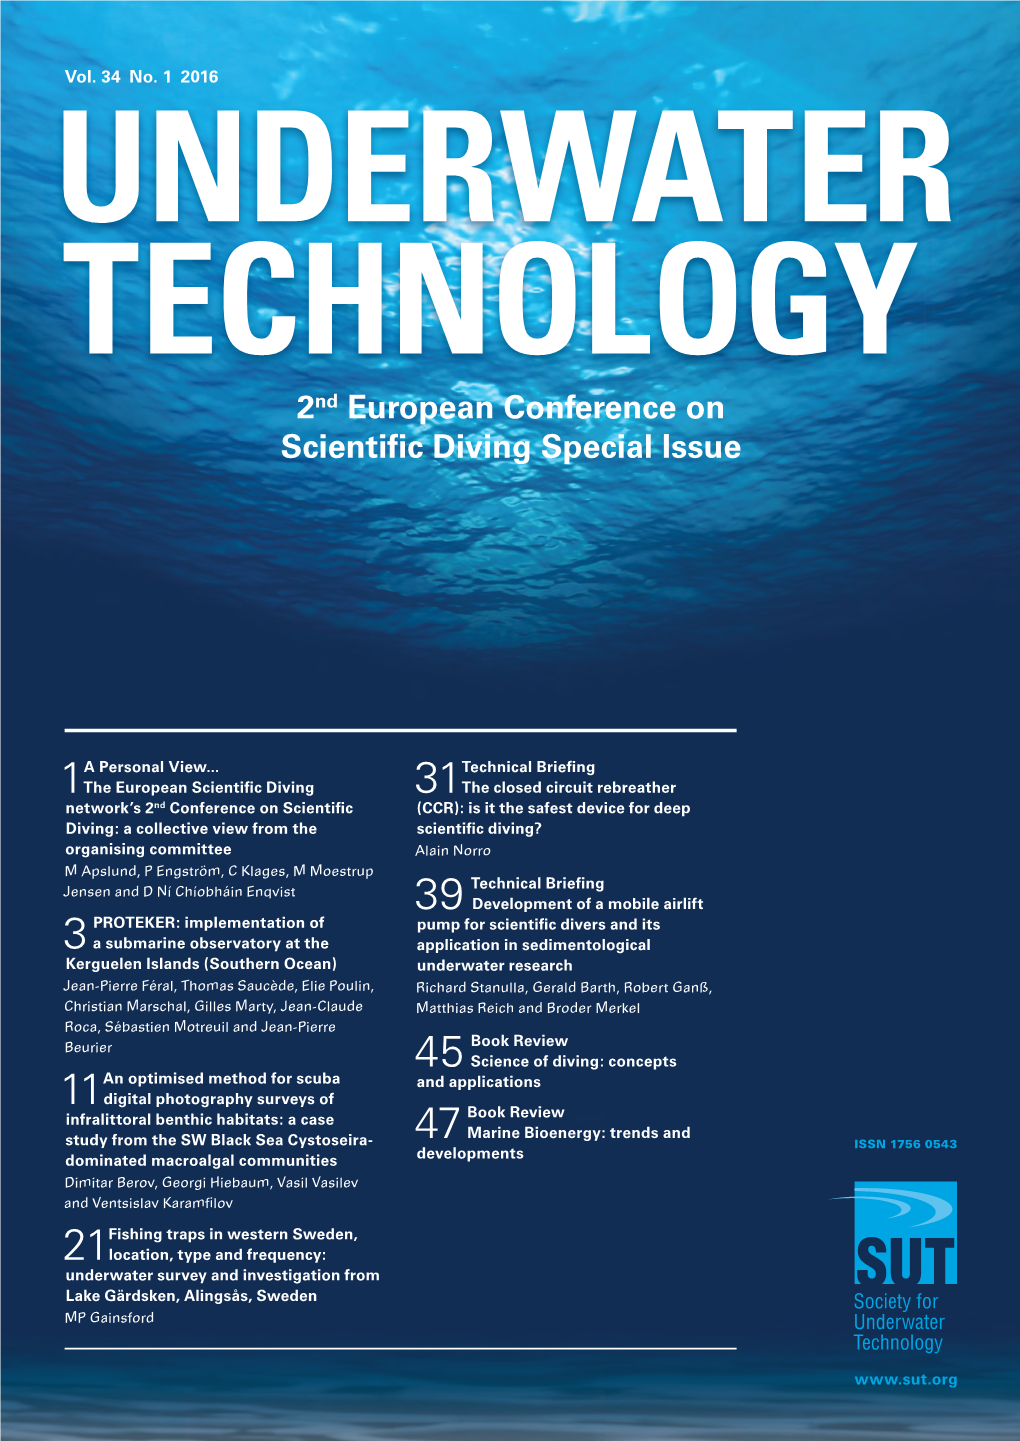 2Nd European Conference on Scientific Diving Special Issue